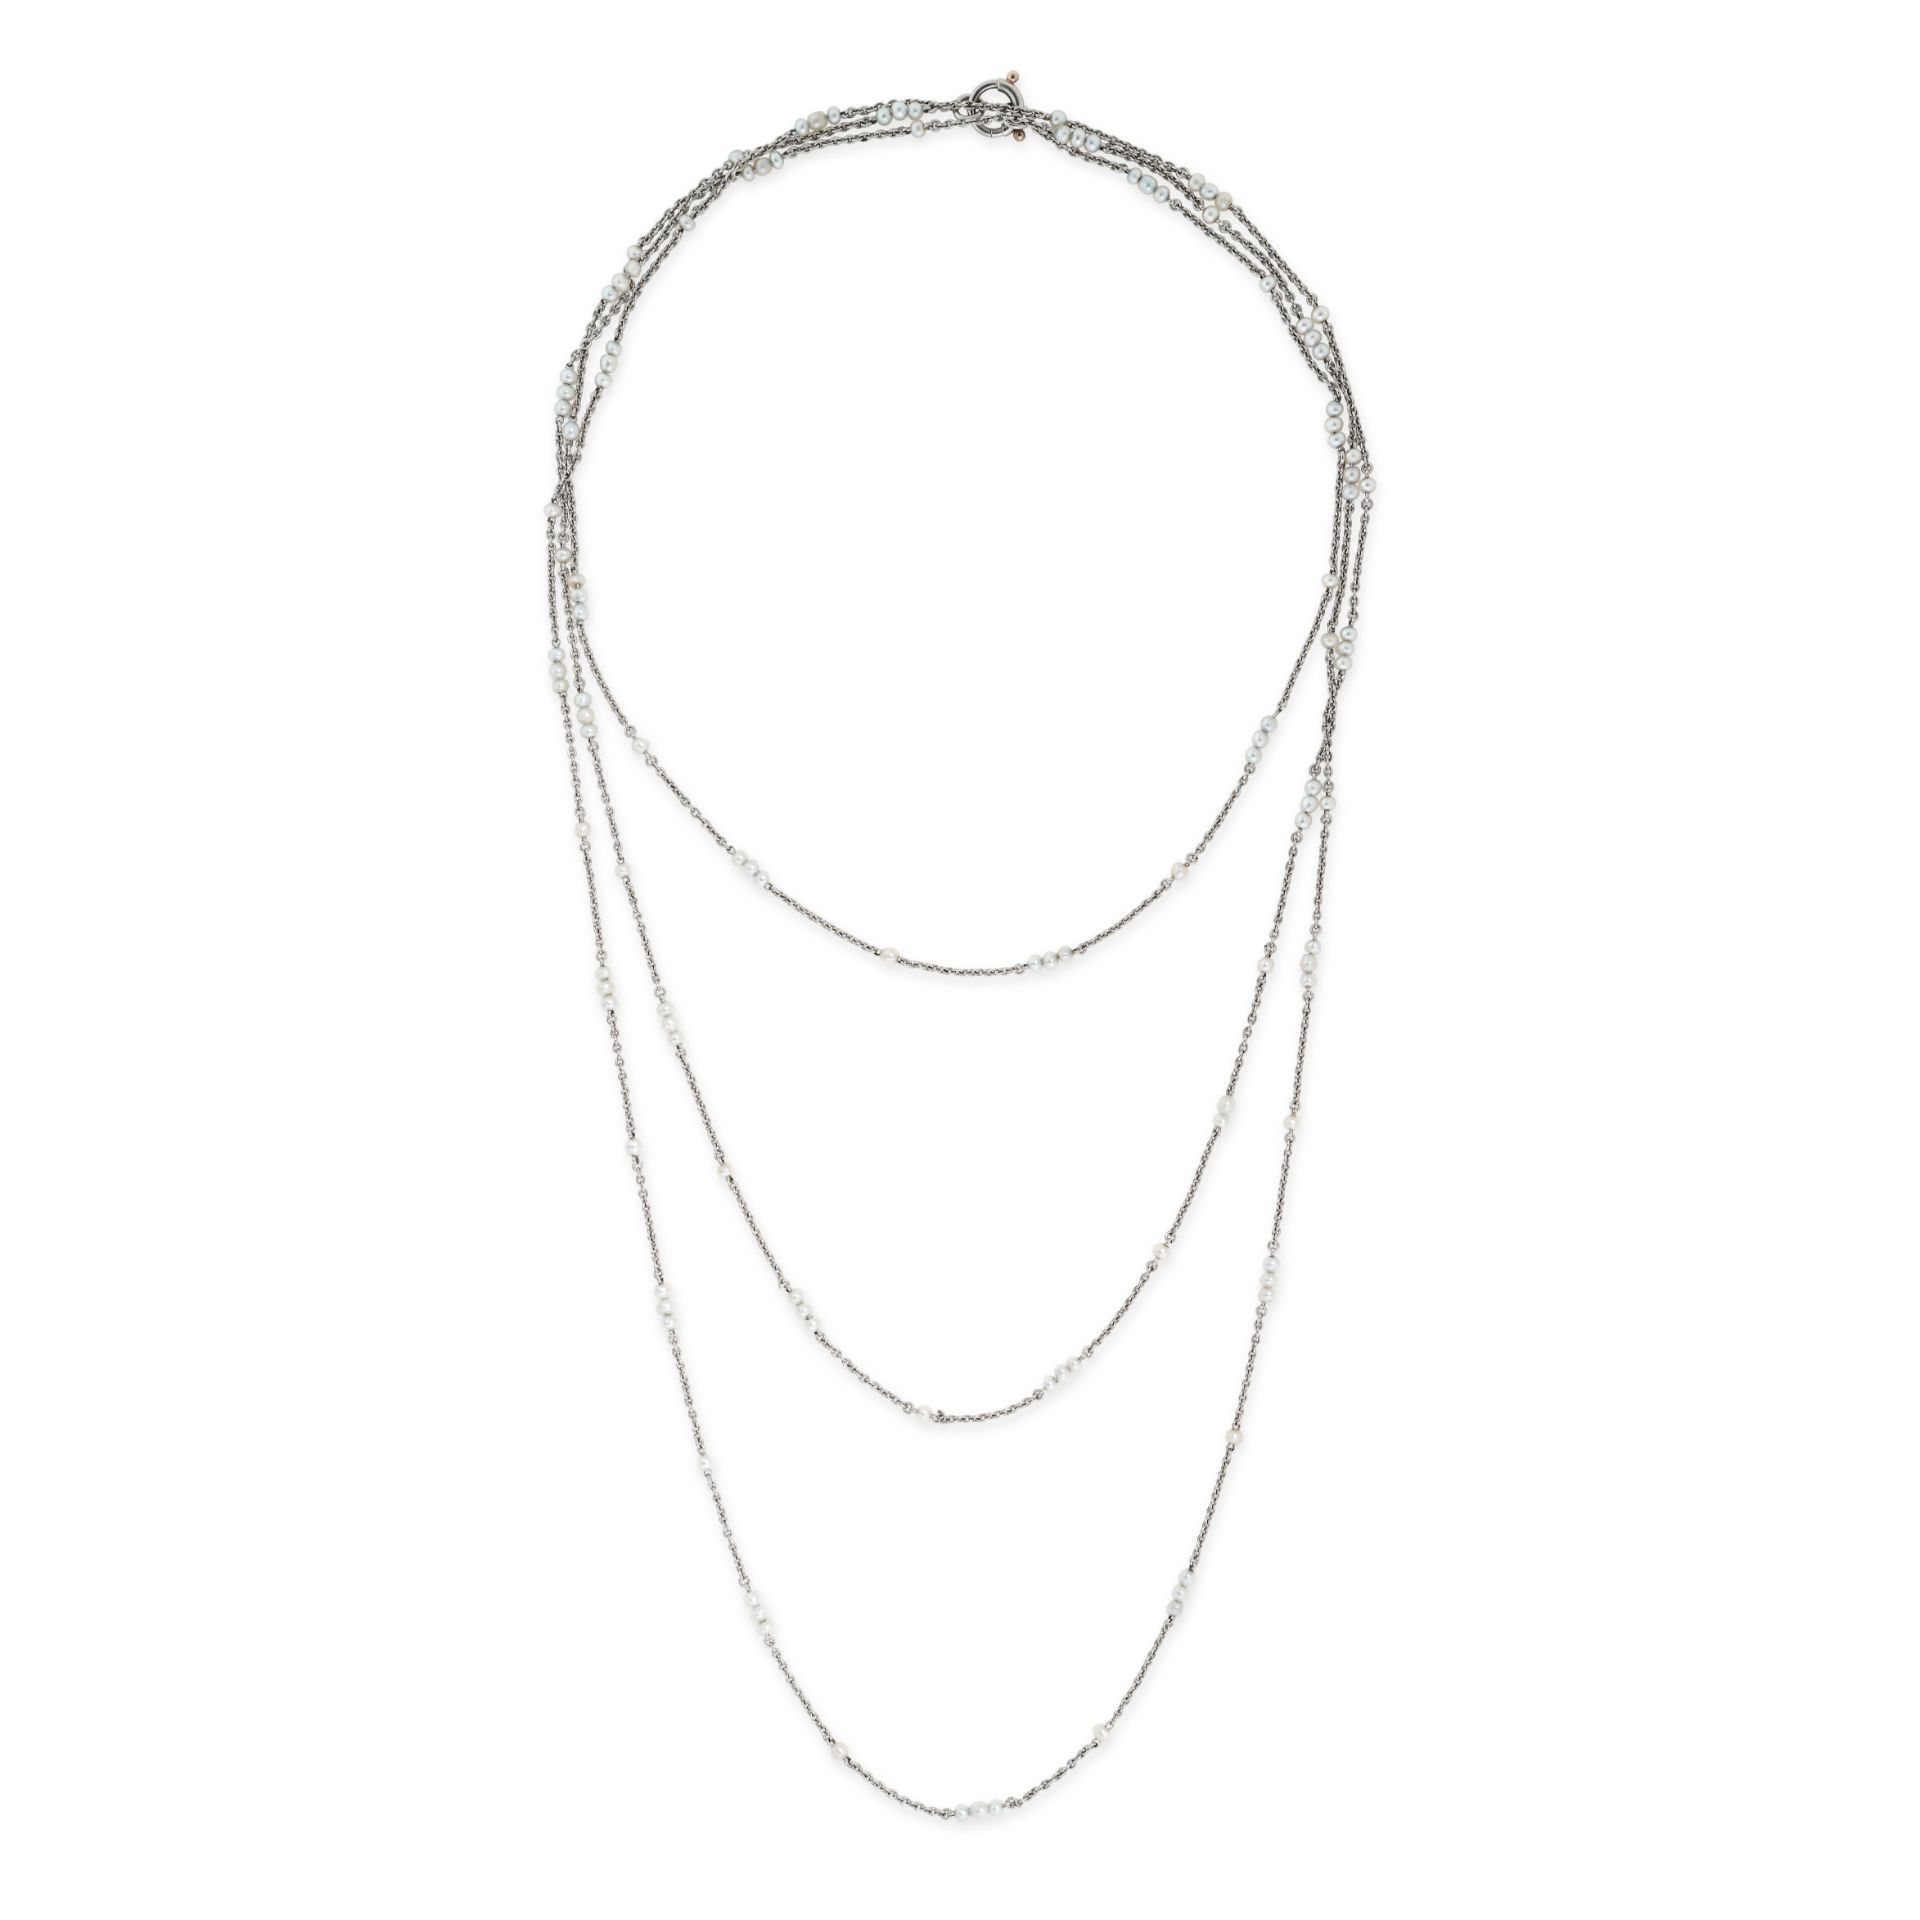 A PEARL SAUTOIR NECKLACE comprising a trace chain set with seed pearls, no assay marks, 150.0cm, ...